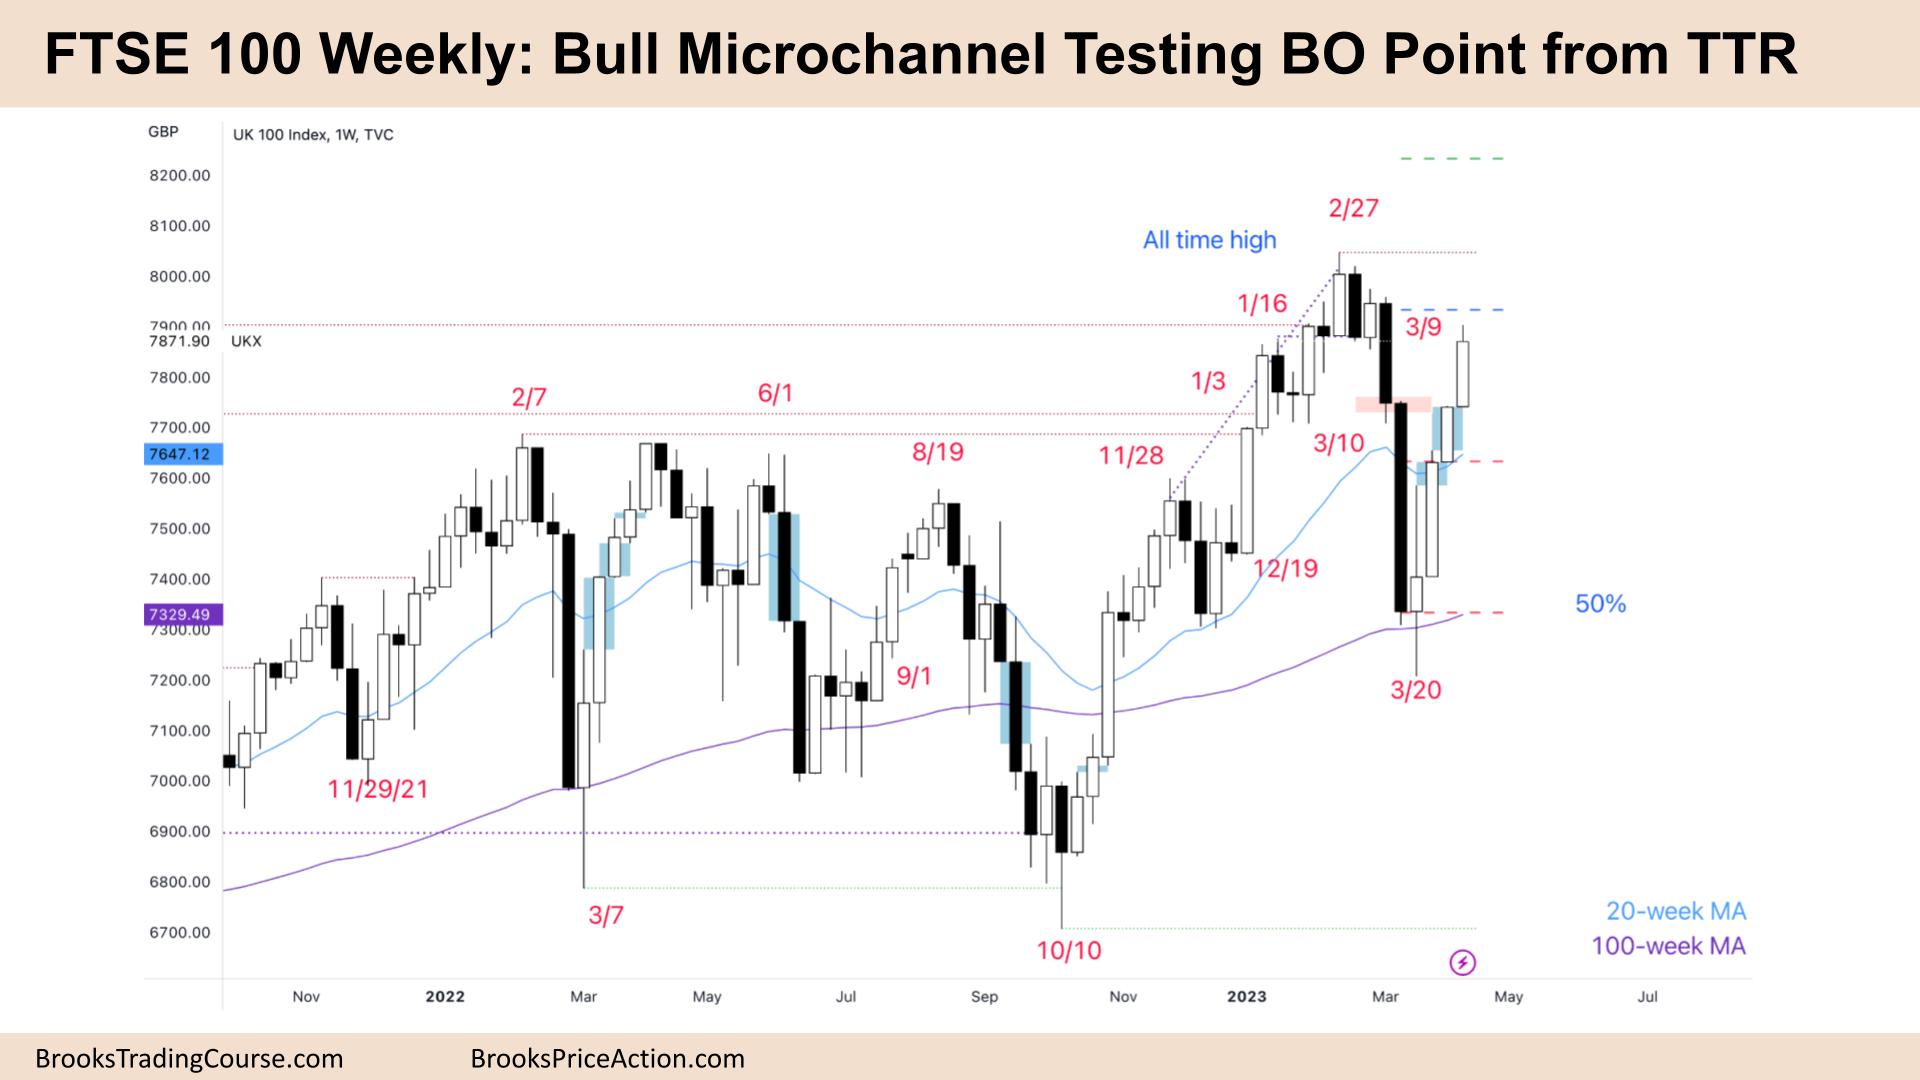 FTSE 100 Big Bull Micro Channel Testing BO Point from TTR